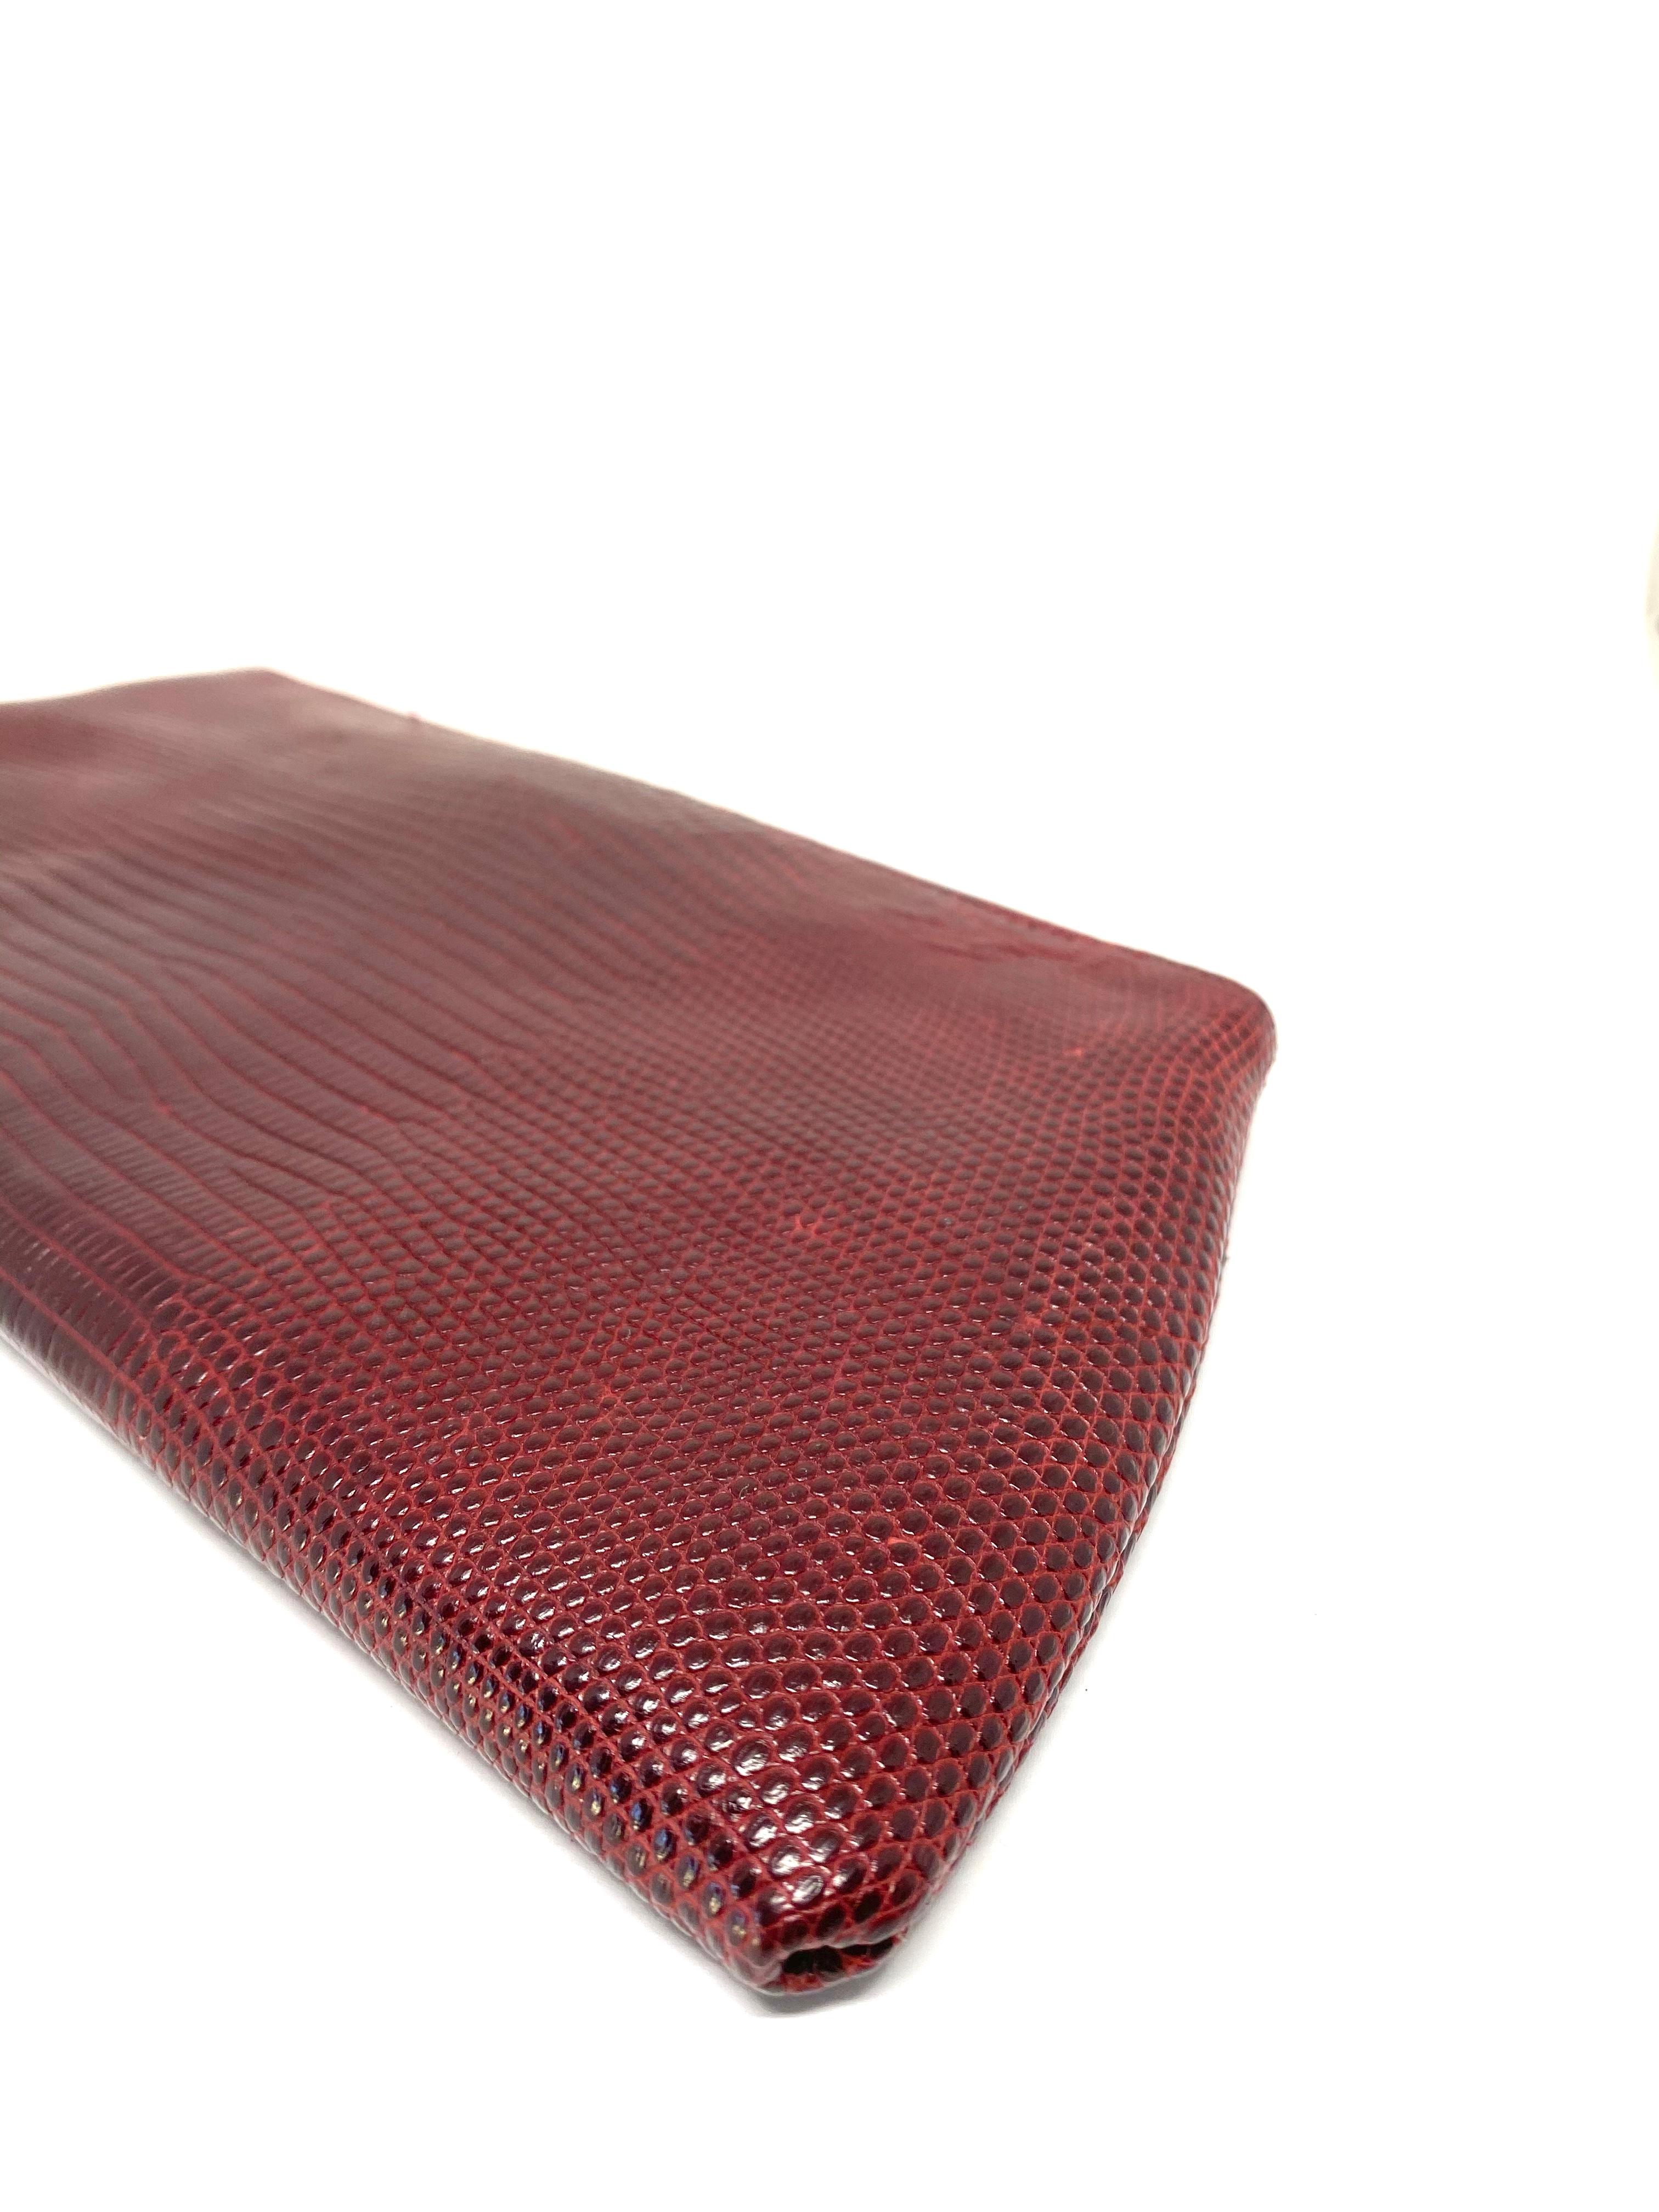 Product details:
Circa 1990
Featuring red burgundy animal/ lizard leather evening clutch with interior pocket with zip closure, double silk lining
Signed
Made in the USA